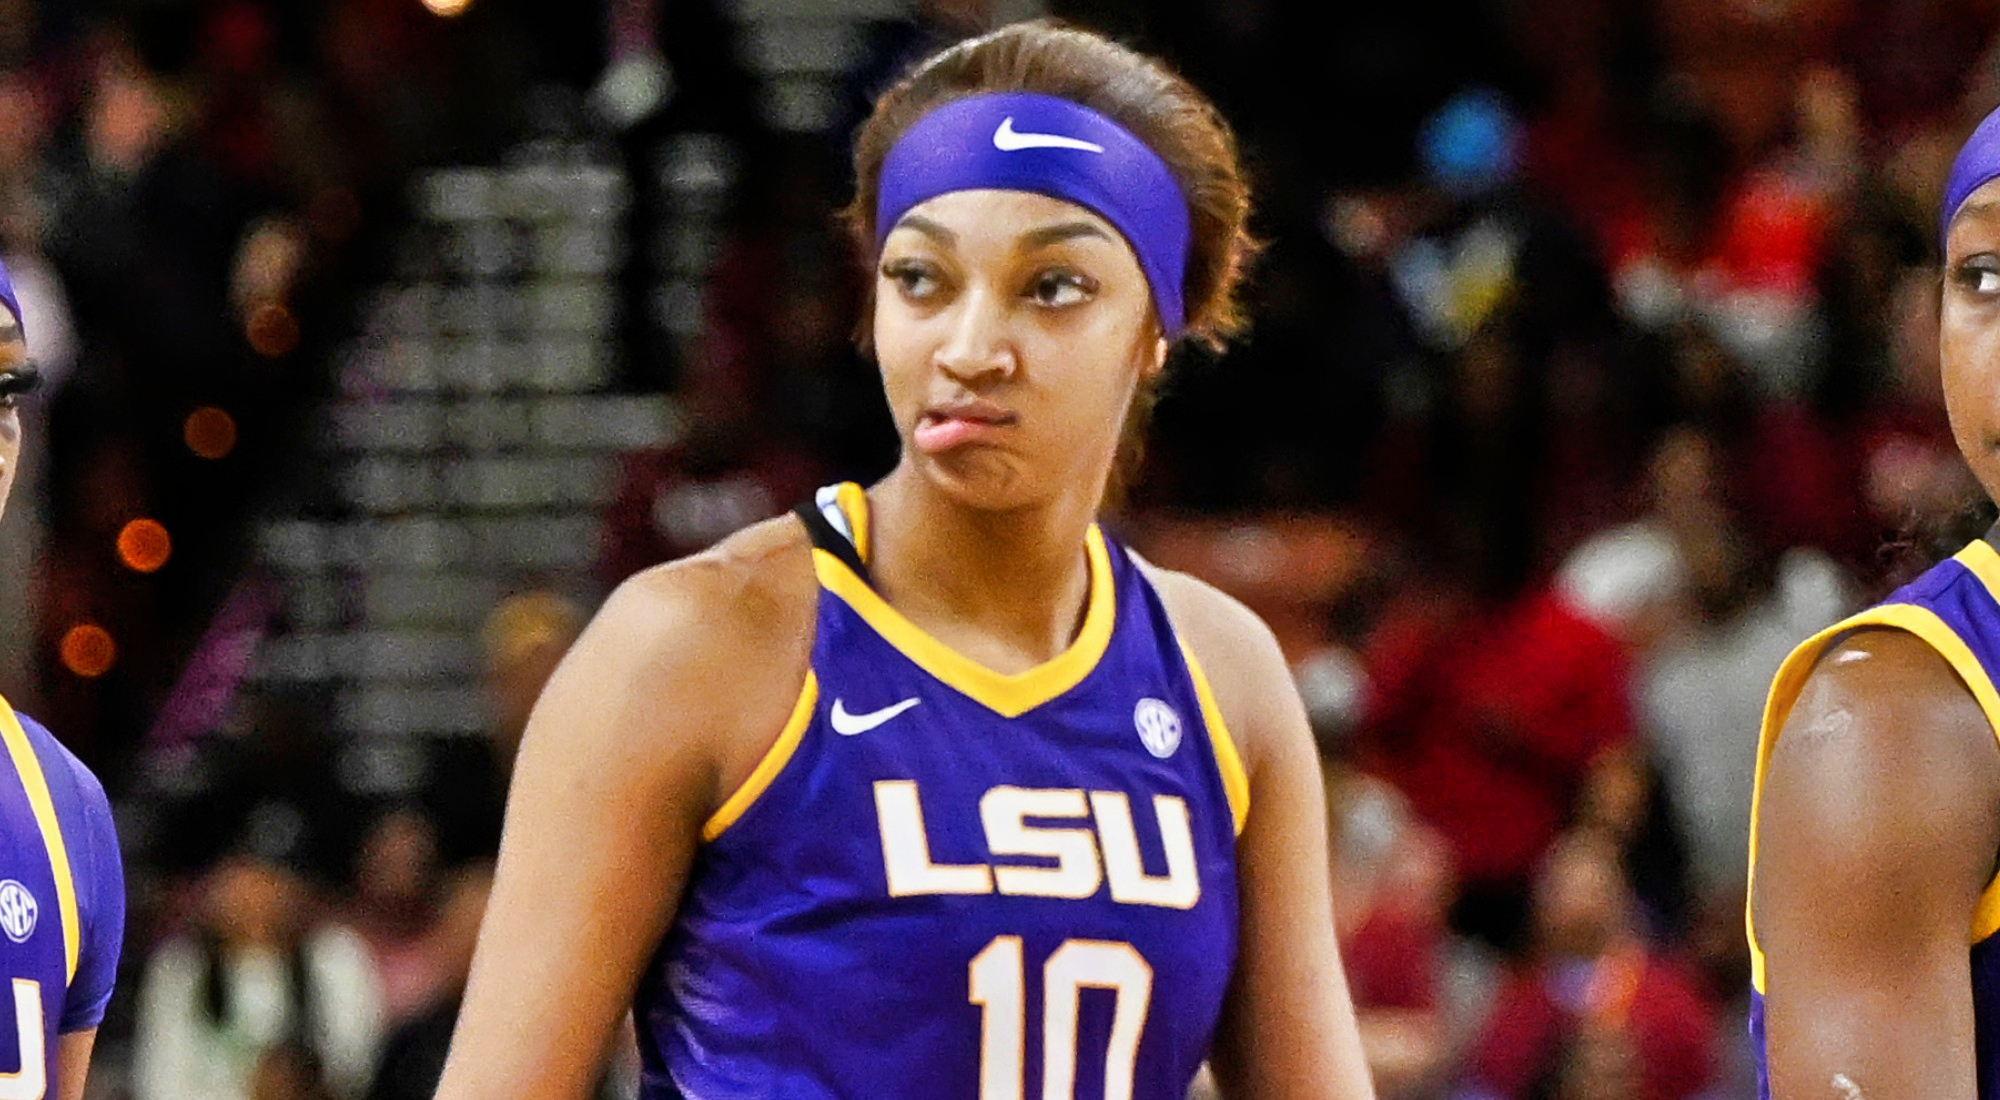 LSU Star Angel Reese Is Pissed Off After "Weird AF" AI Photos Of Her Surfaced Online